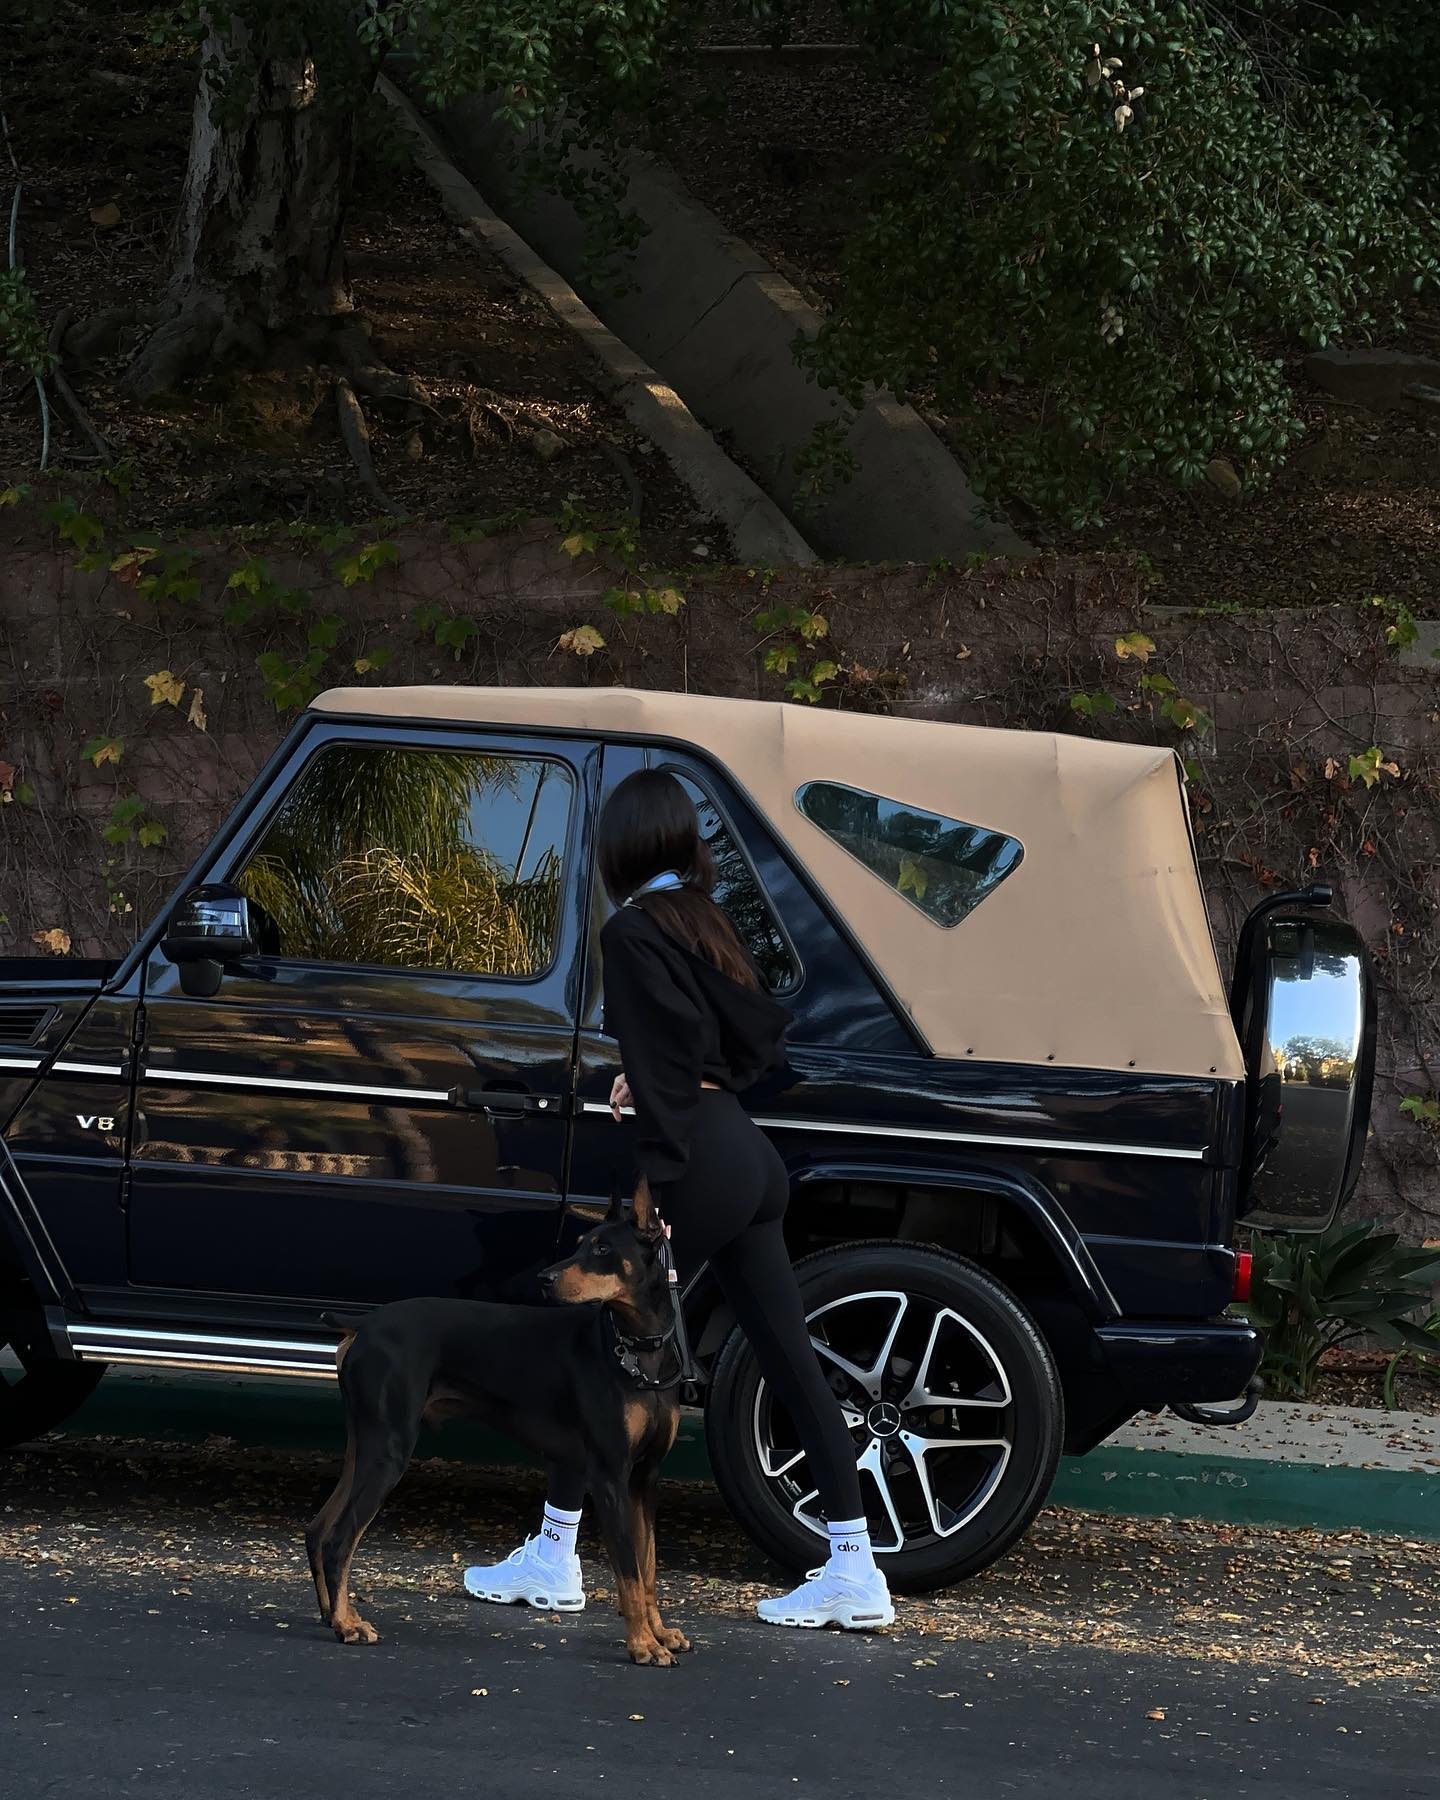 She also stood in front of her lavish Mercedes-Benz G-wagon